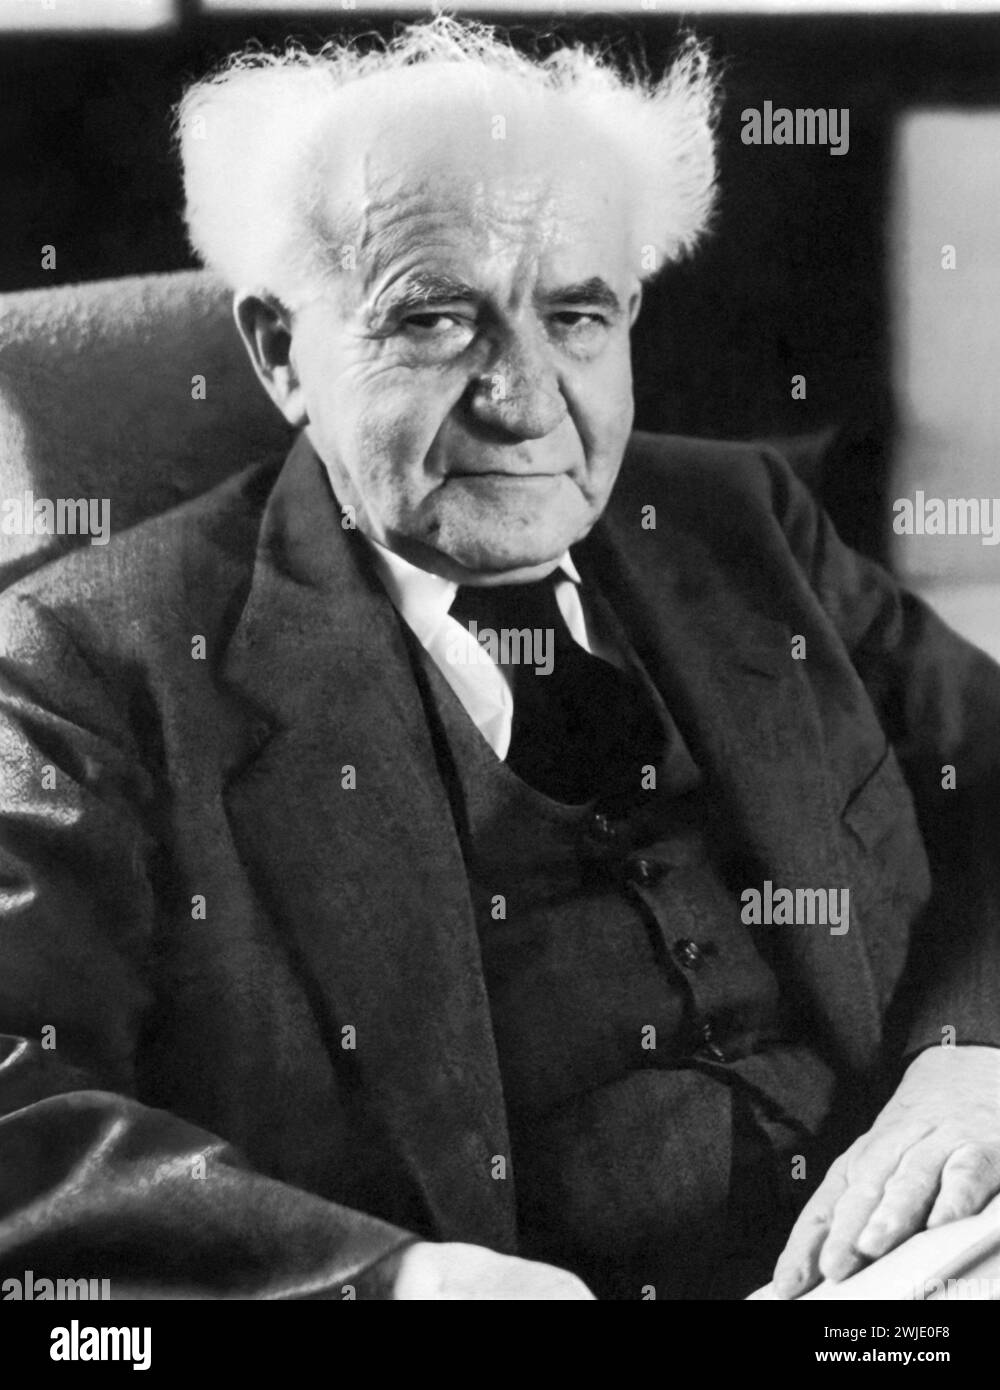 David Ben-Gurion (1886-1973), primary national founder of the State of Israel as well as the state's first prime minister. Stock Photo